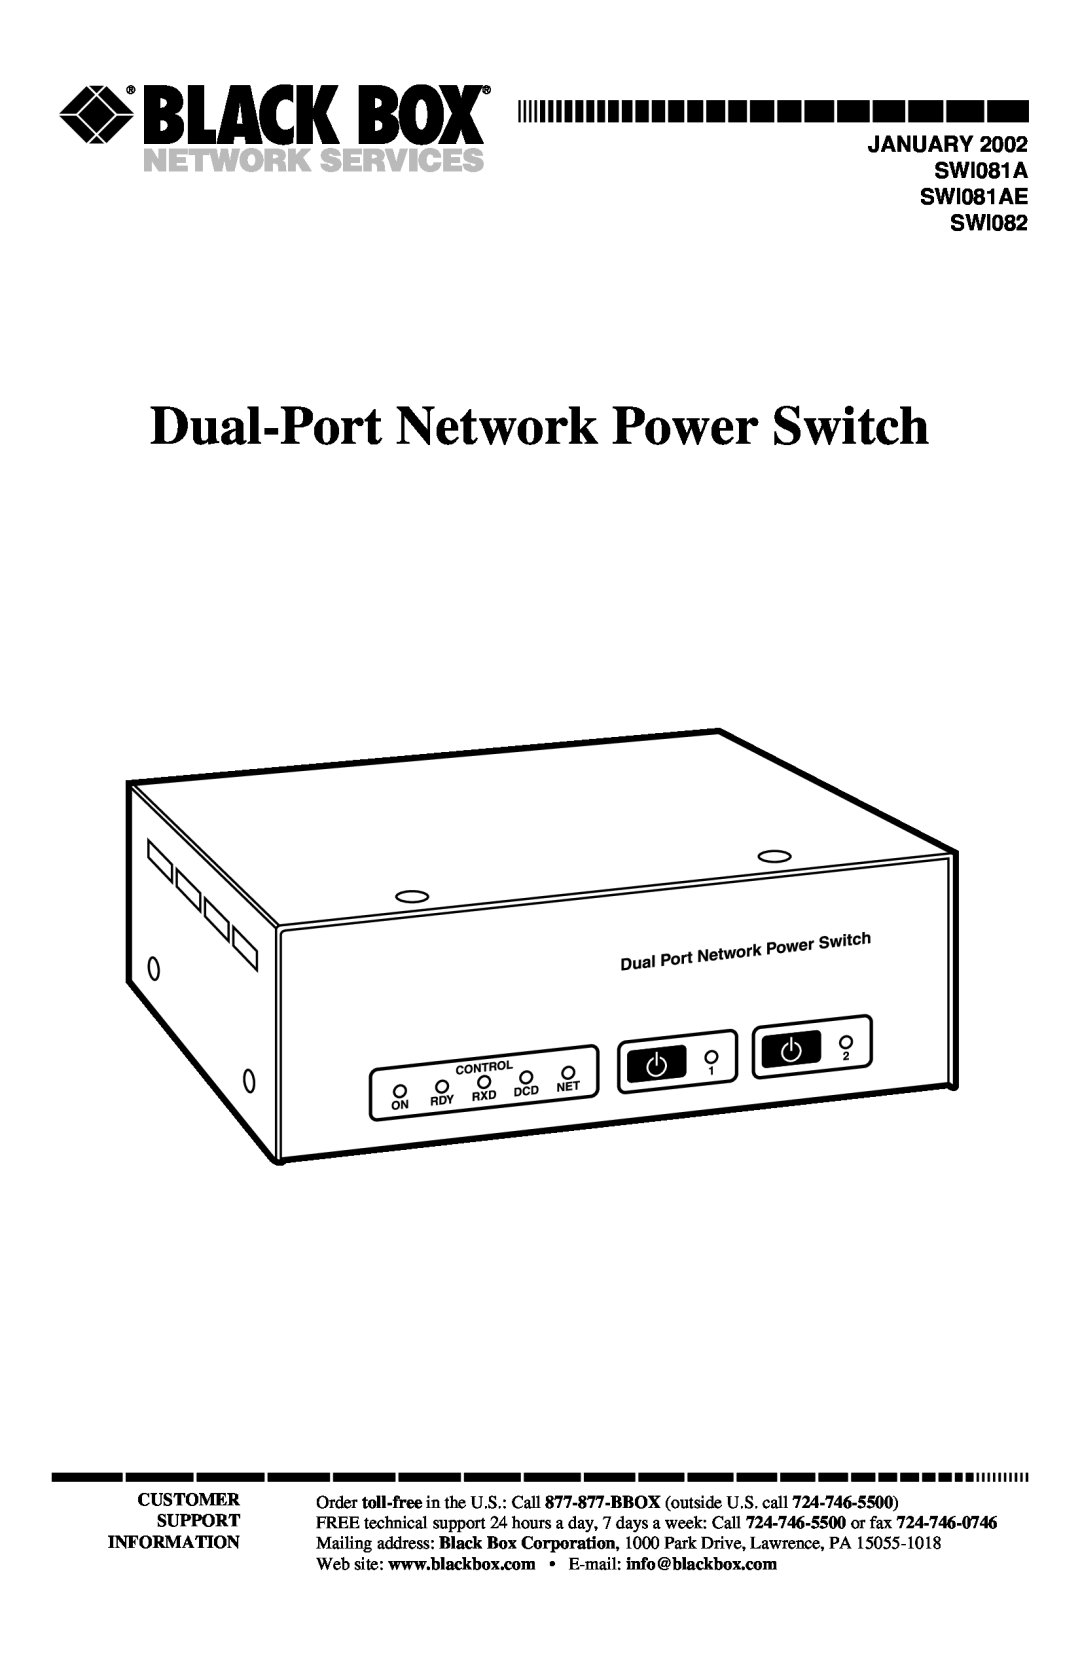 Black Box SWI081AE manual Dual-PortNetwork Power Switch, Customer, Order, Support, Information, E-mail, toll-free, or fax 